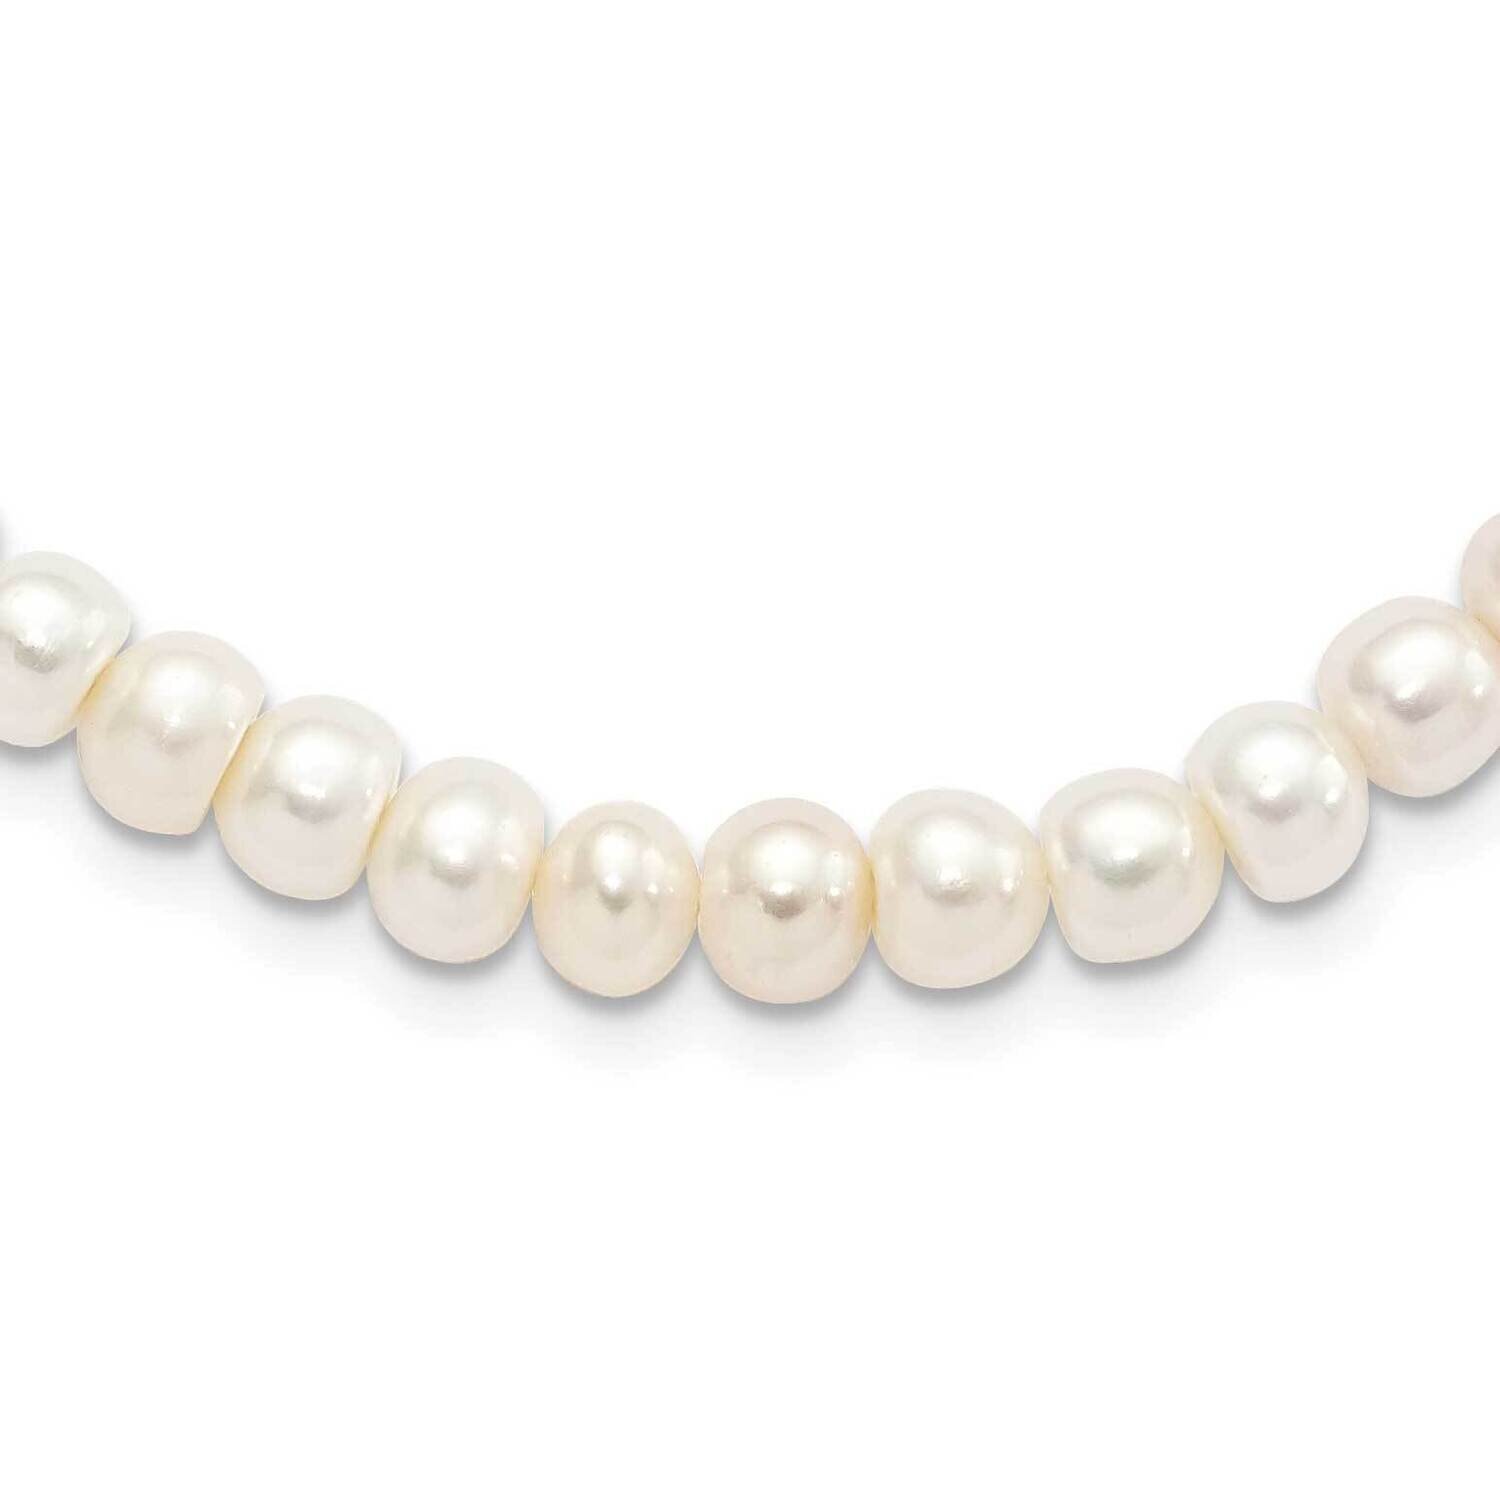 7-8mm White Cultured Freshwater Pearl Necklace Sterling Silver Rhodium-plated QH5628-18